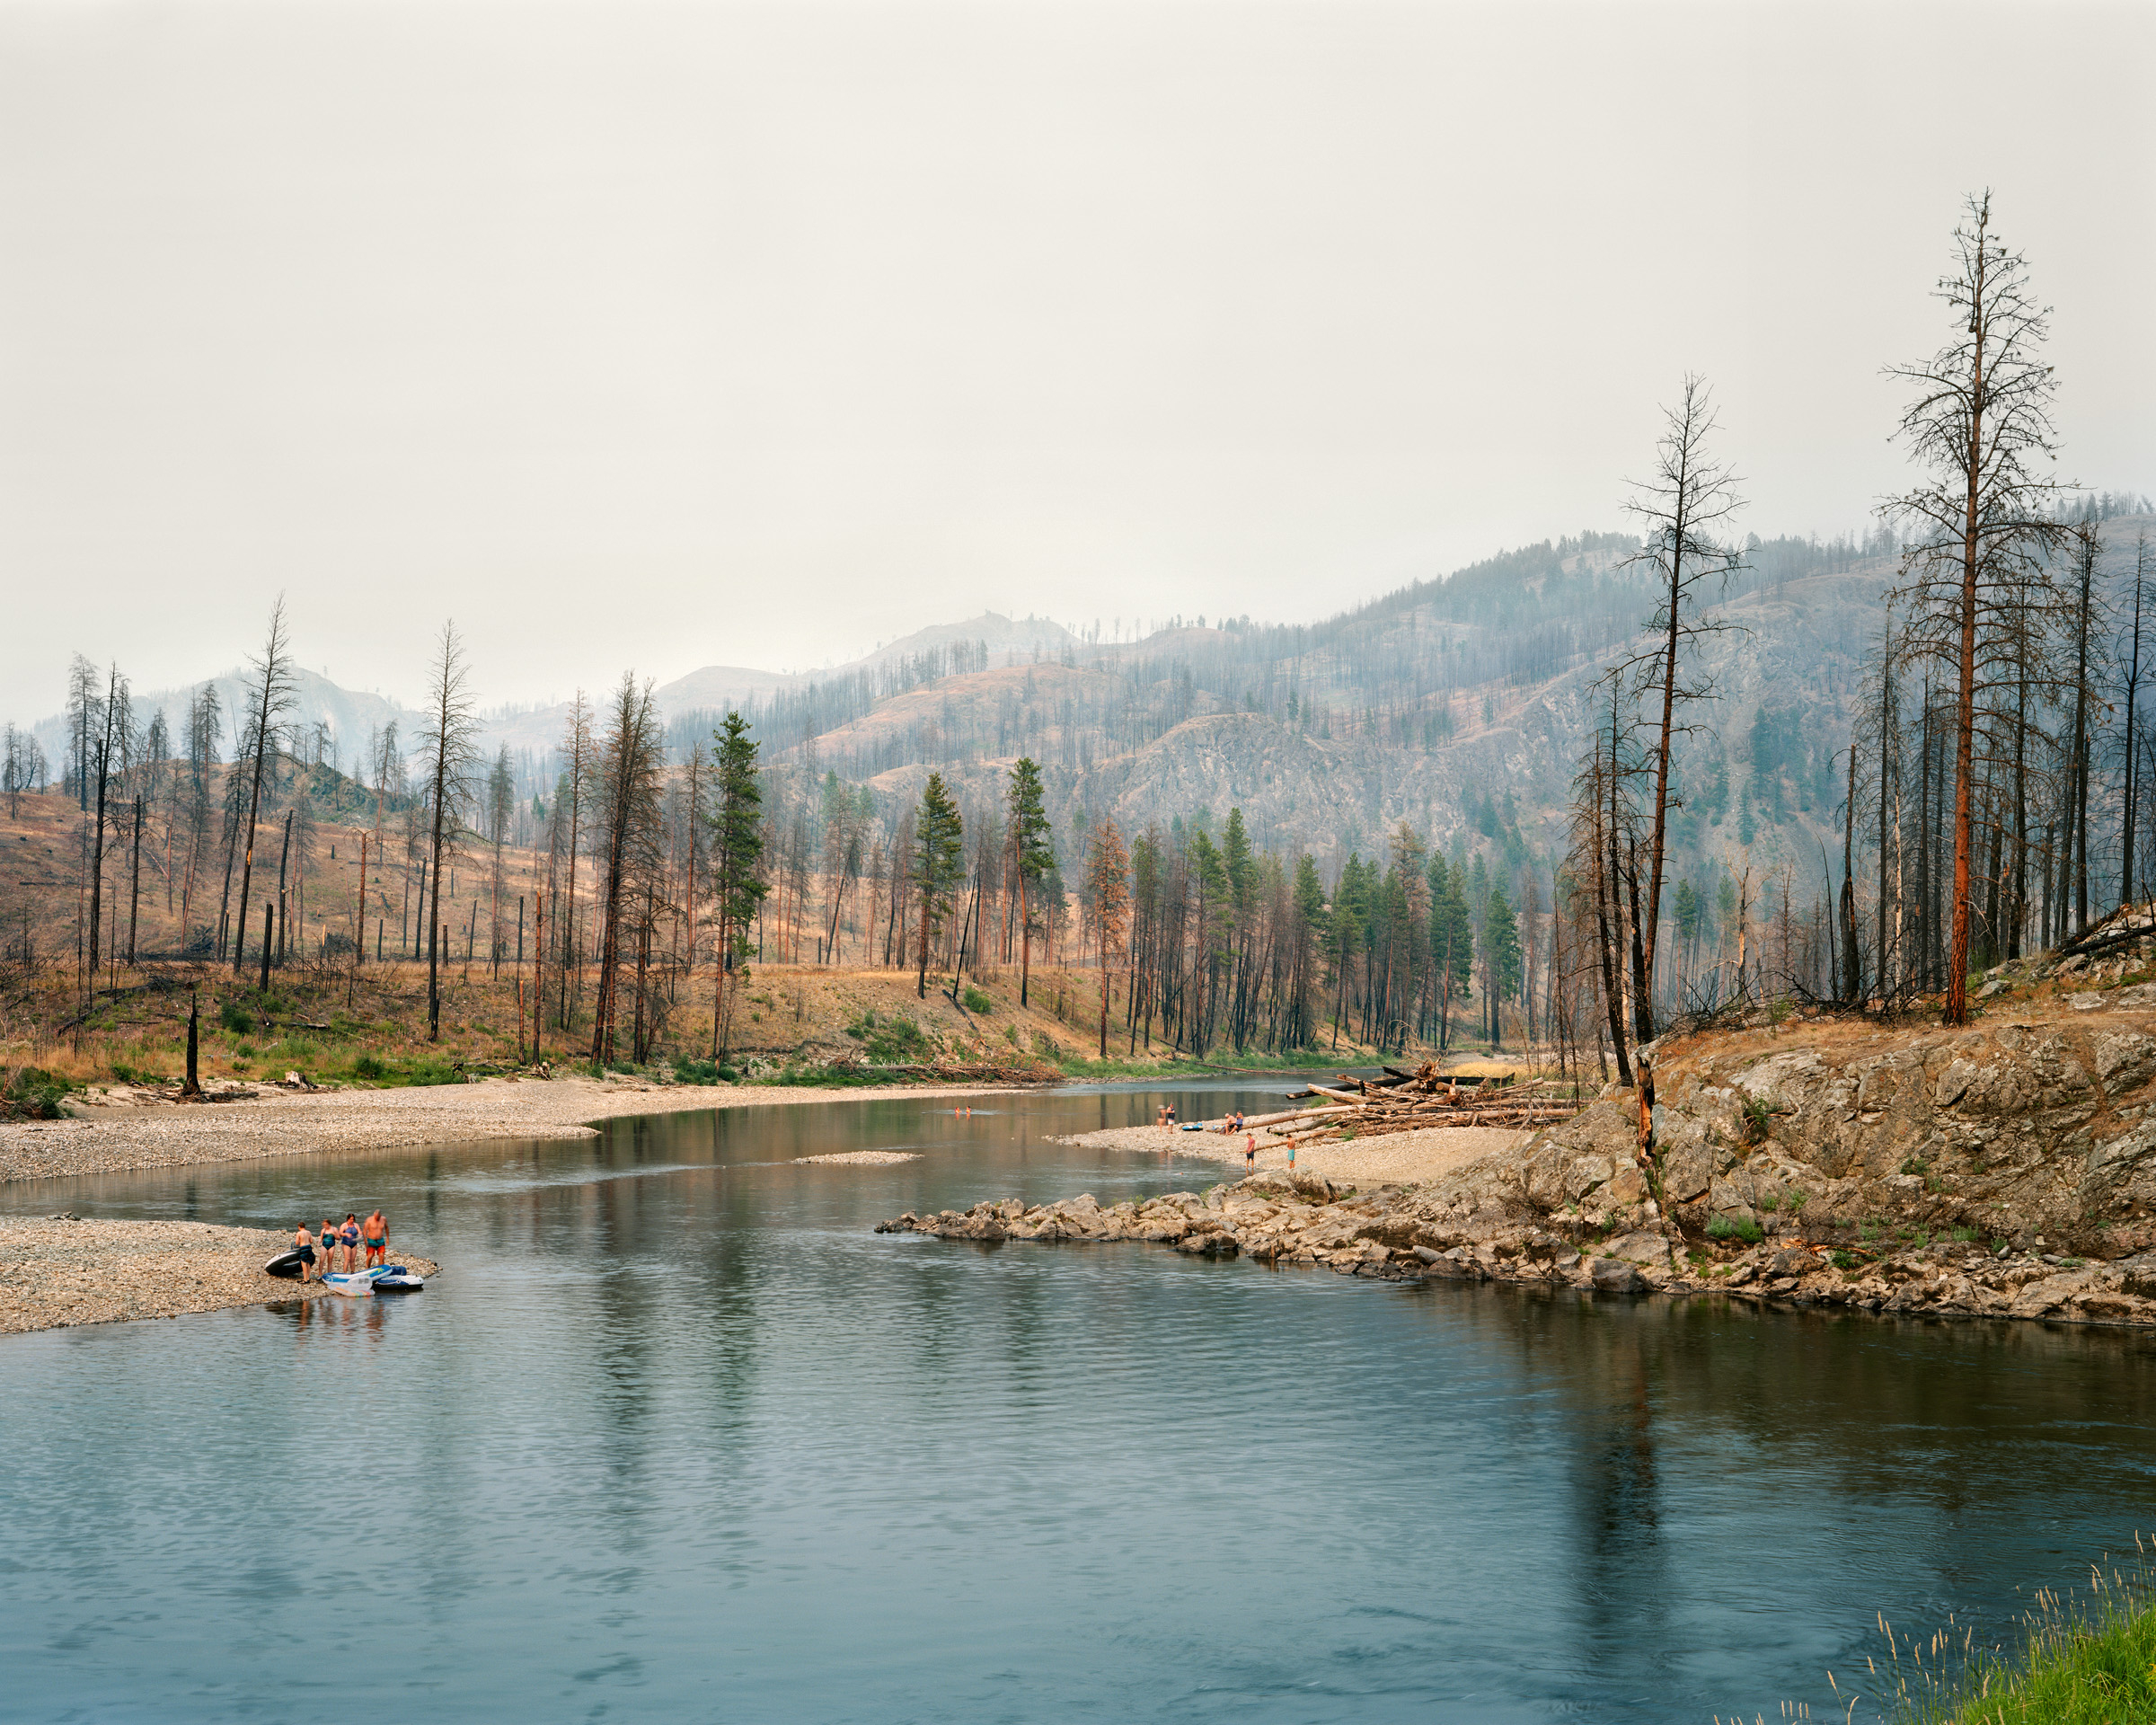 Andreas Rutkauskas, Kettle River Recreation Area, 2019, from the series After the Fire. Courtesy of the artist and Prefix Institute of Contemporary Art, Toronto